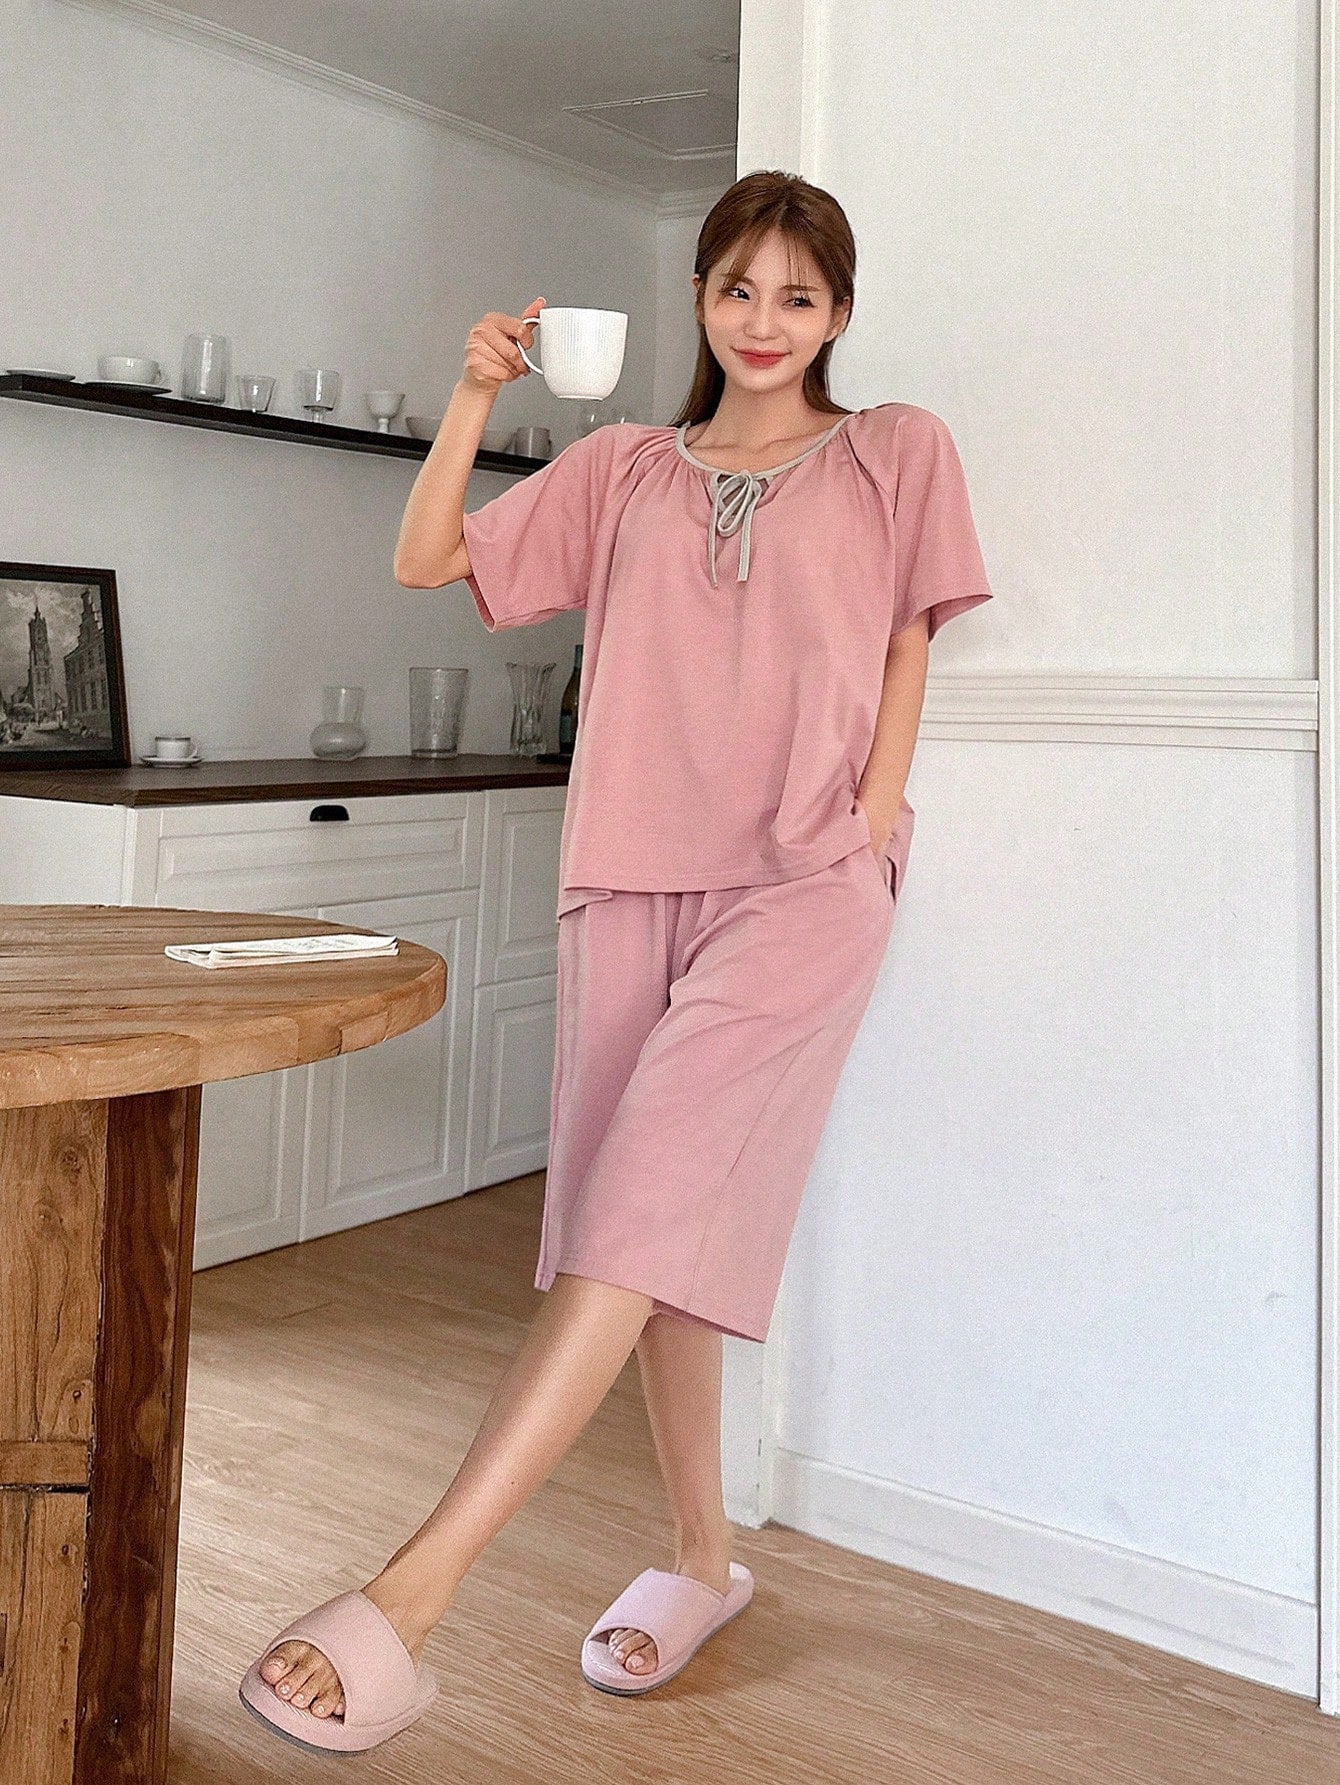 Solid Color Contrast Trim Drawstring Neckline Top With Pleated Detailing And Capri Shorts Set, For Home Wear